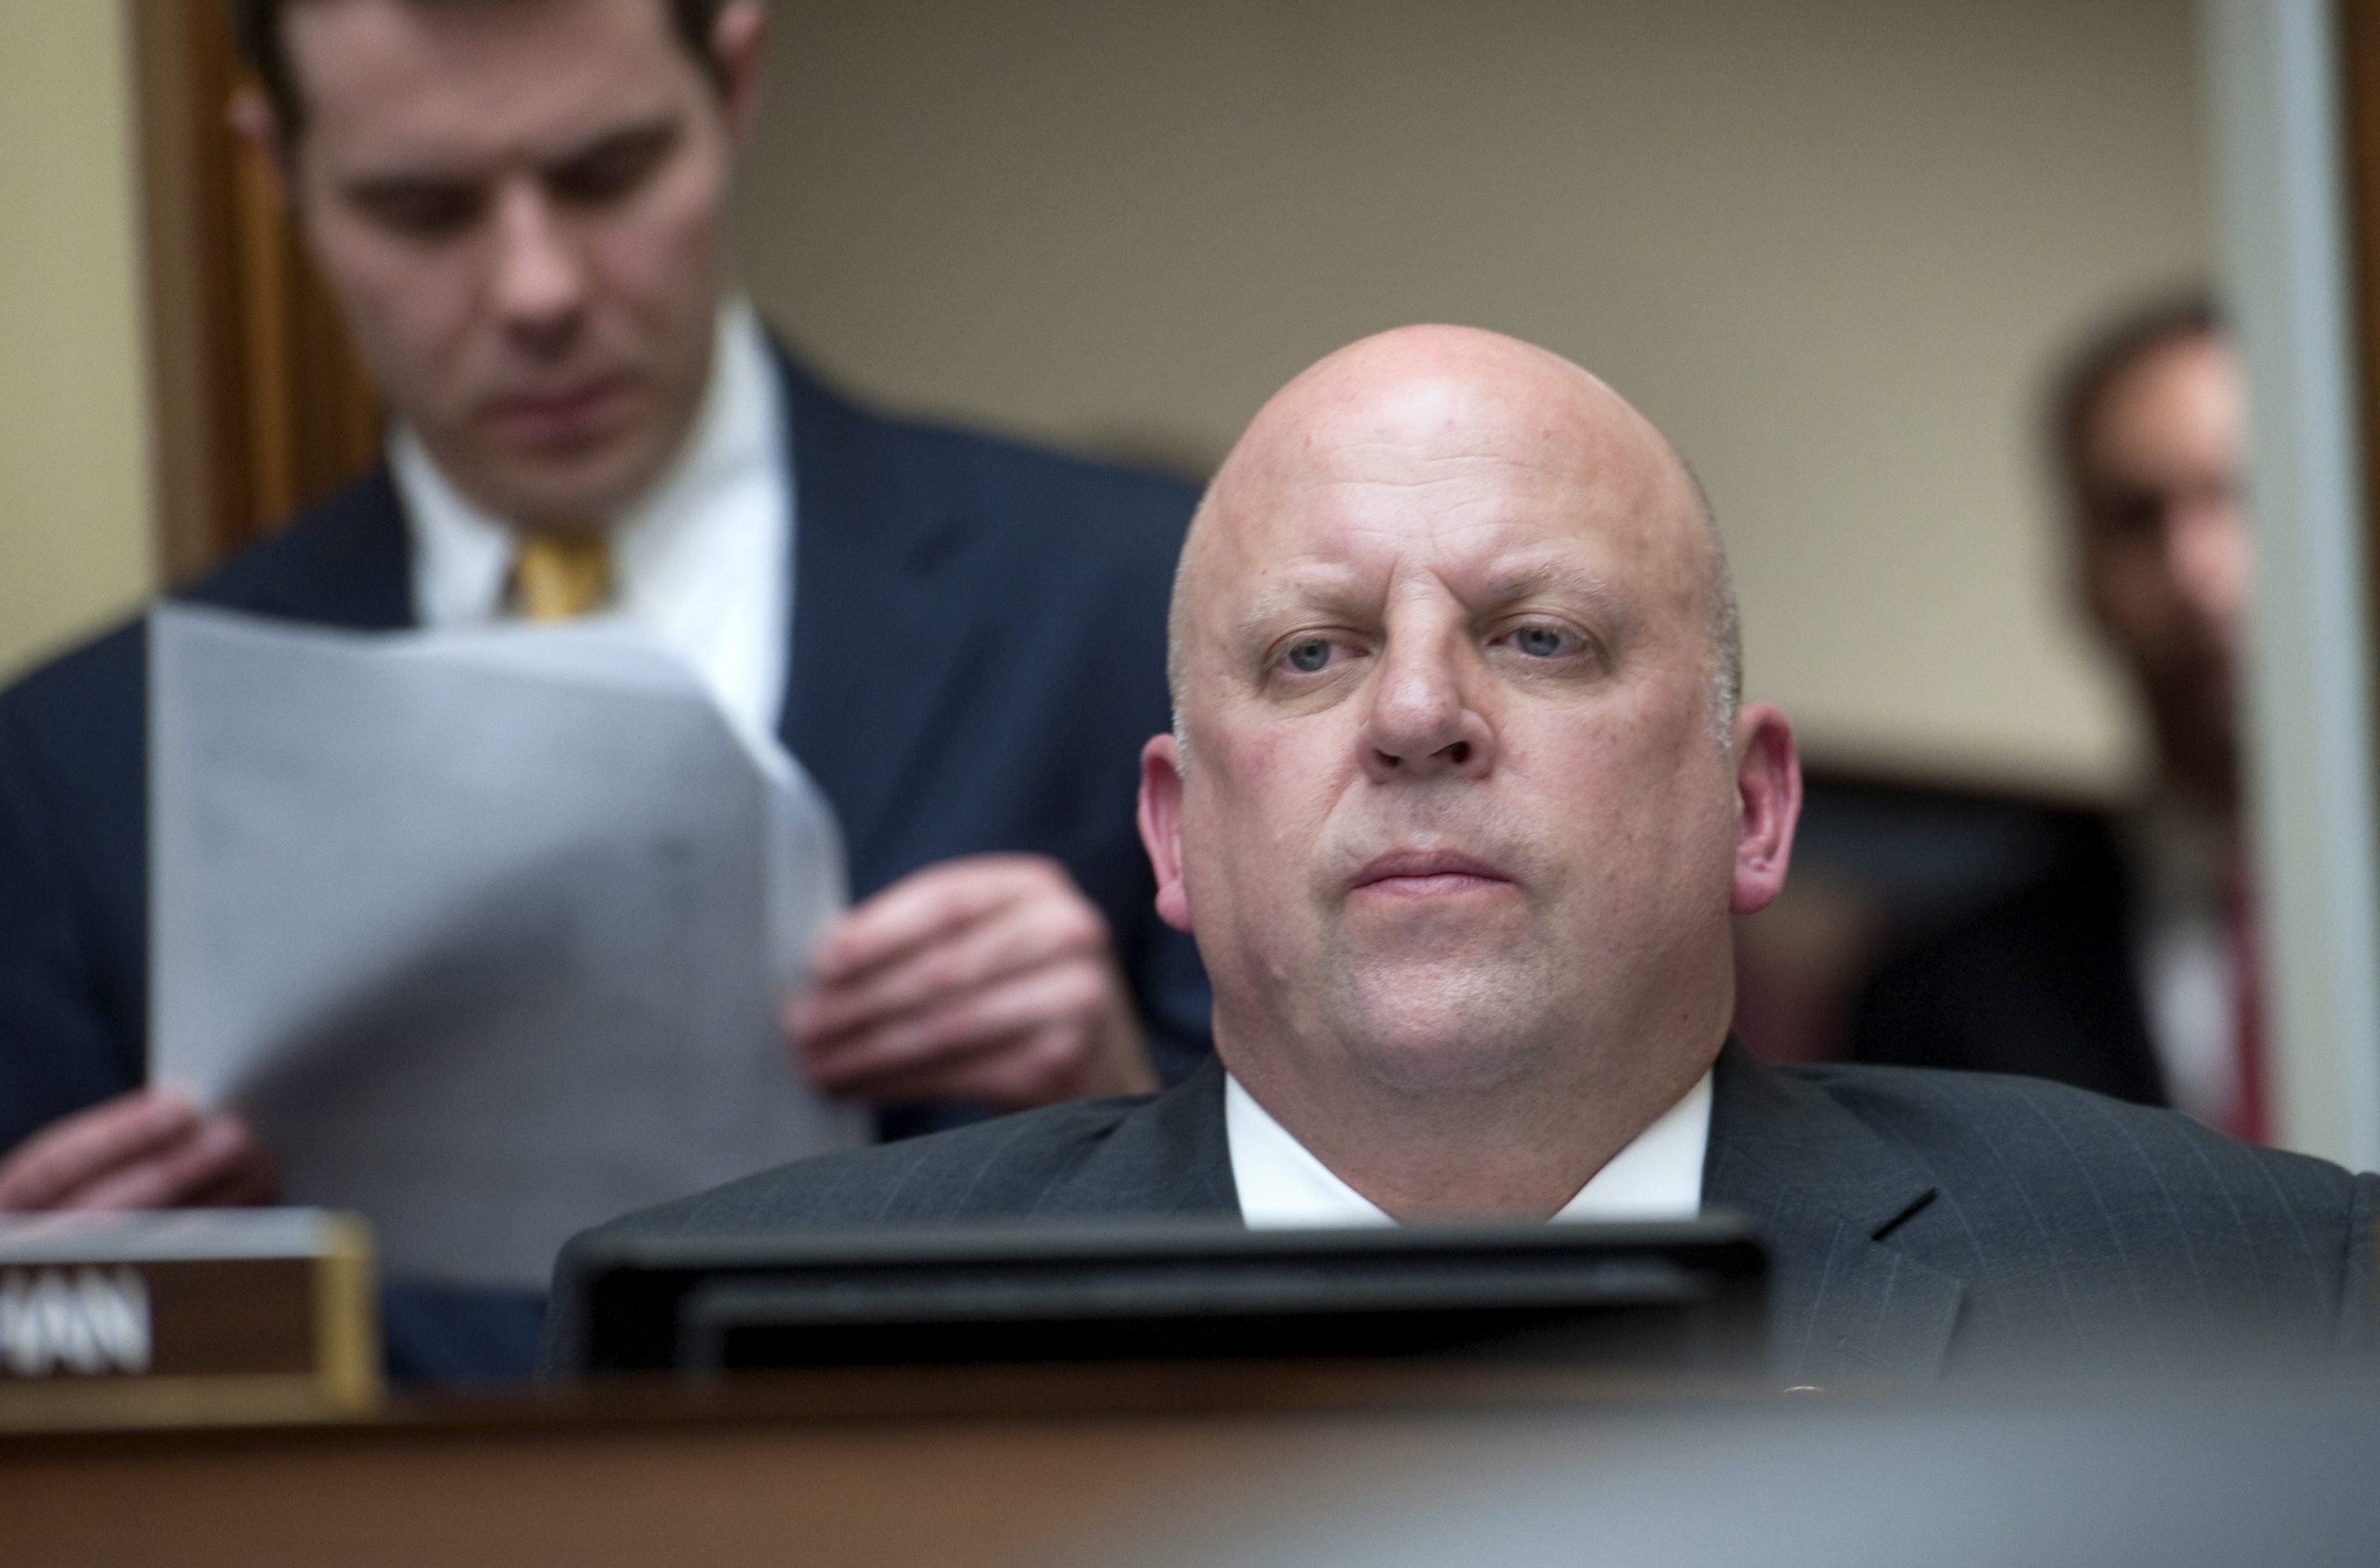 Rep. Scott DesJarlais, R-Tenn., at a House Oversight and Government Reform Committee hearing on 